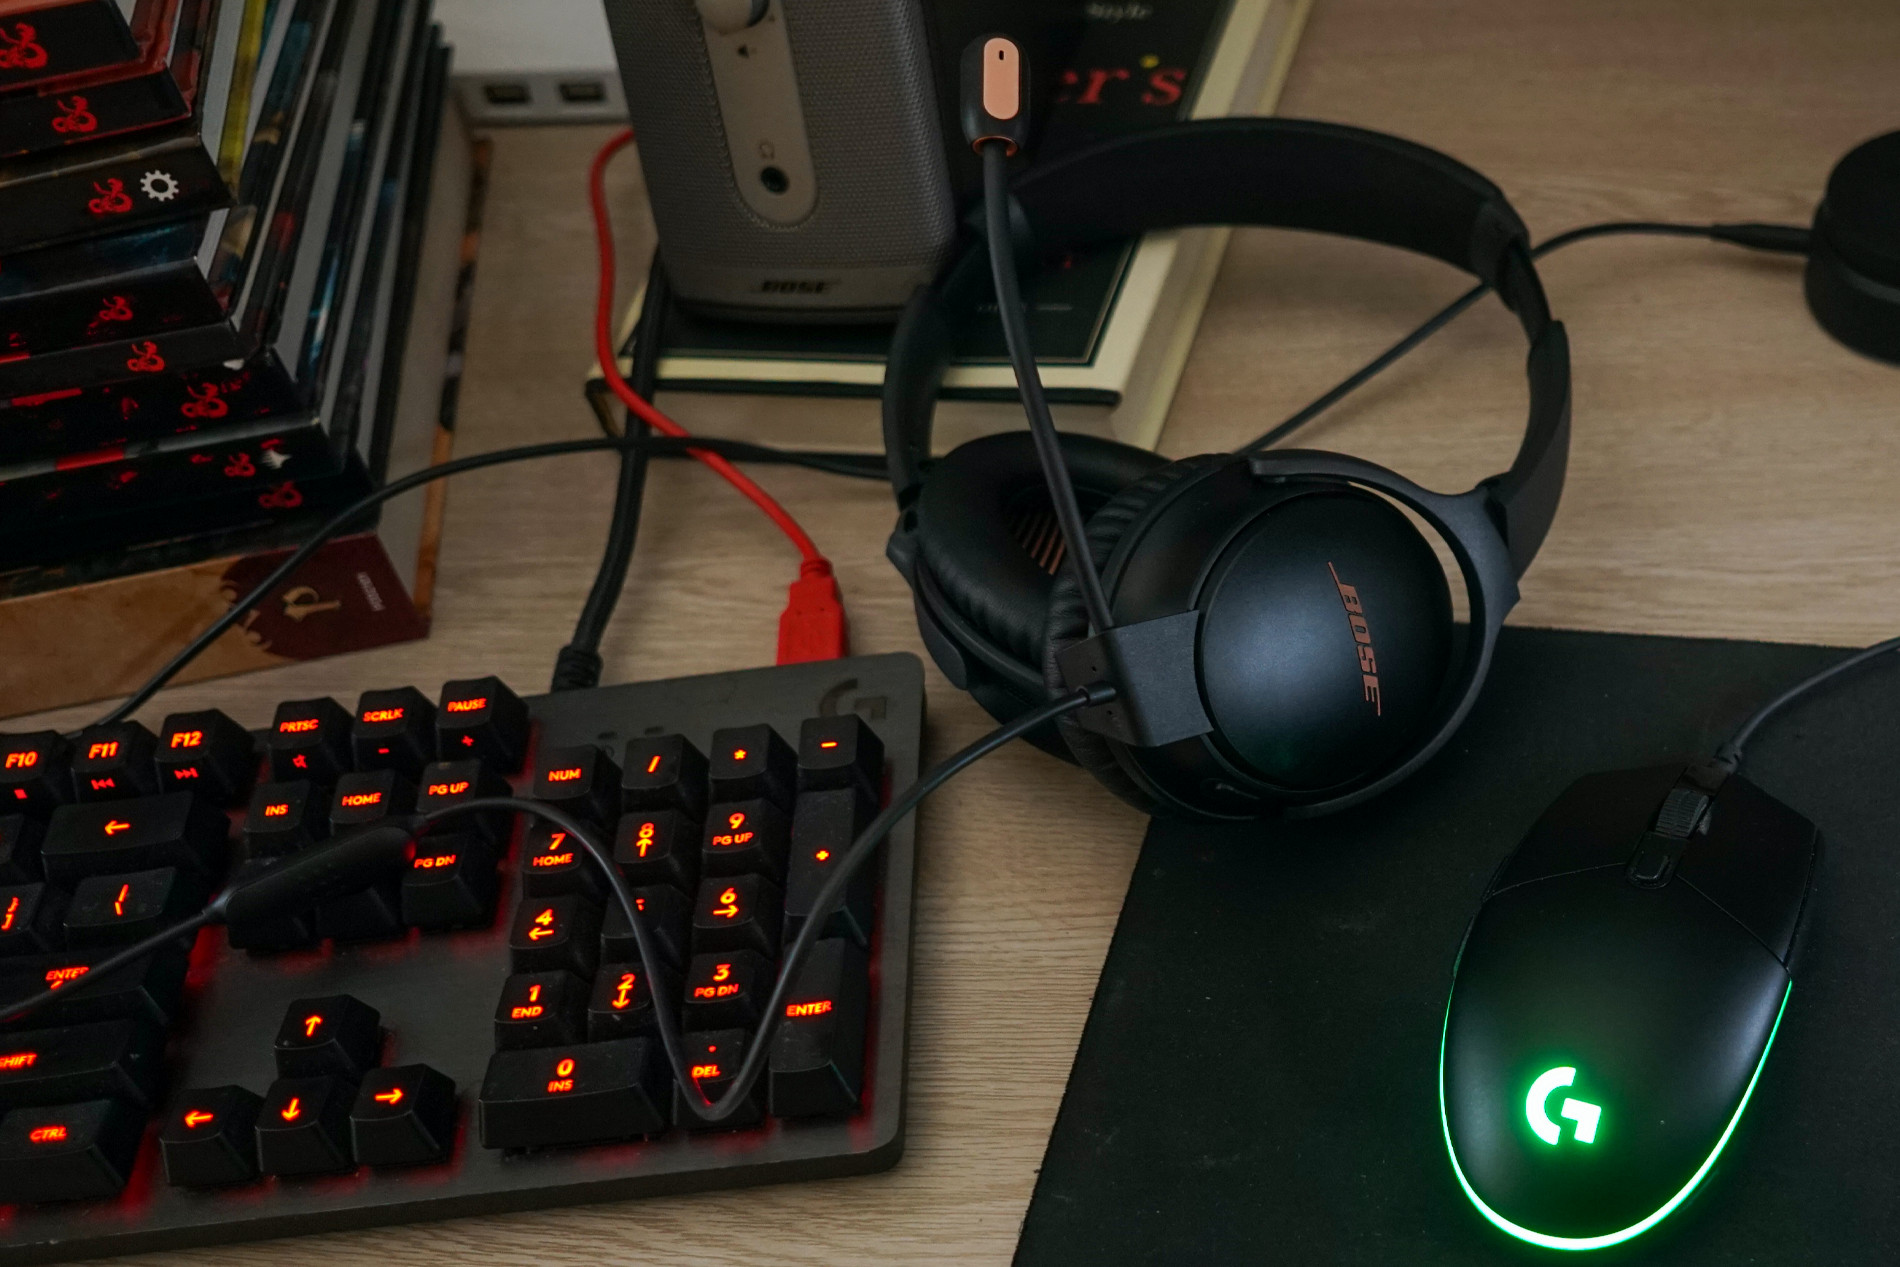 The Bose QuietComfort 35 II Gaming Headset sits on a desk next to Logitech gaming keyboard and gaming mouse, a Bose Companion speaker, and copies Dungeons and Dragons rulebooks, the Pathfinder Core Rulebook, and Dreyer's English